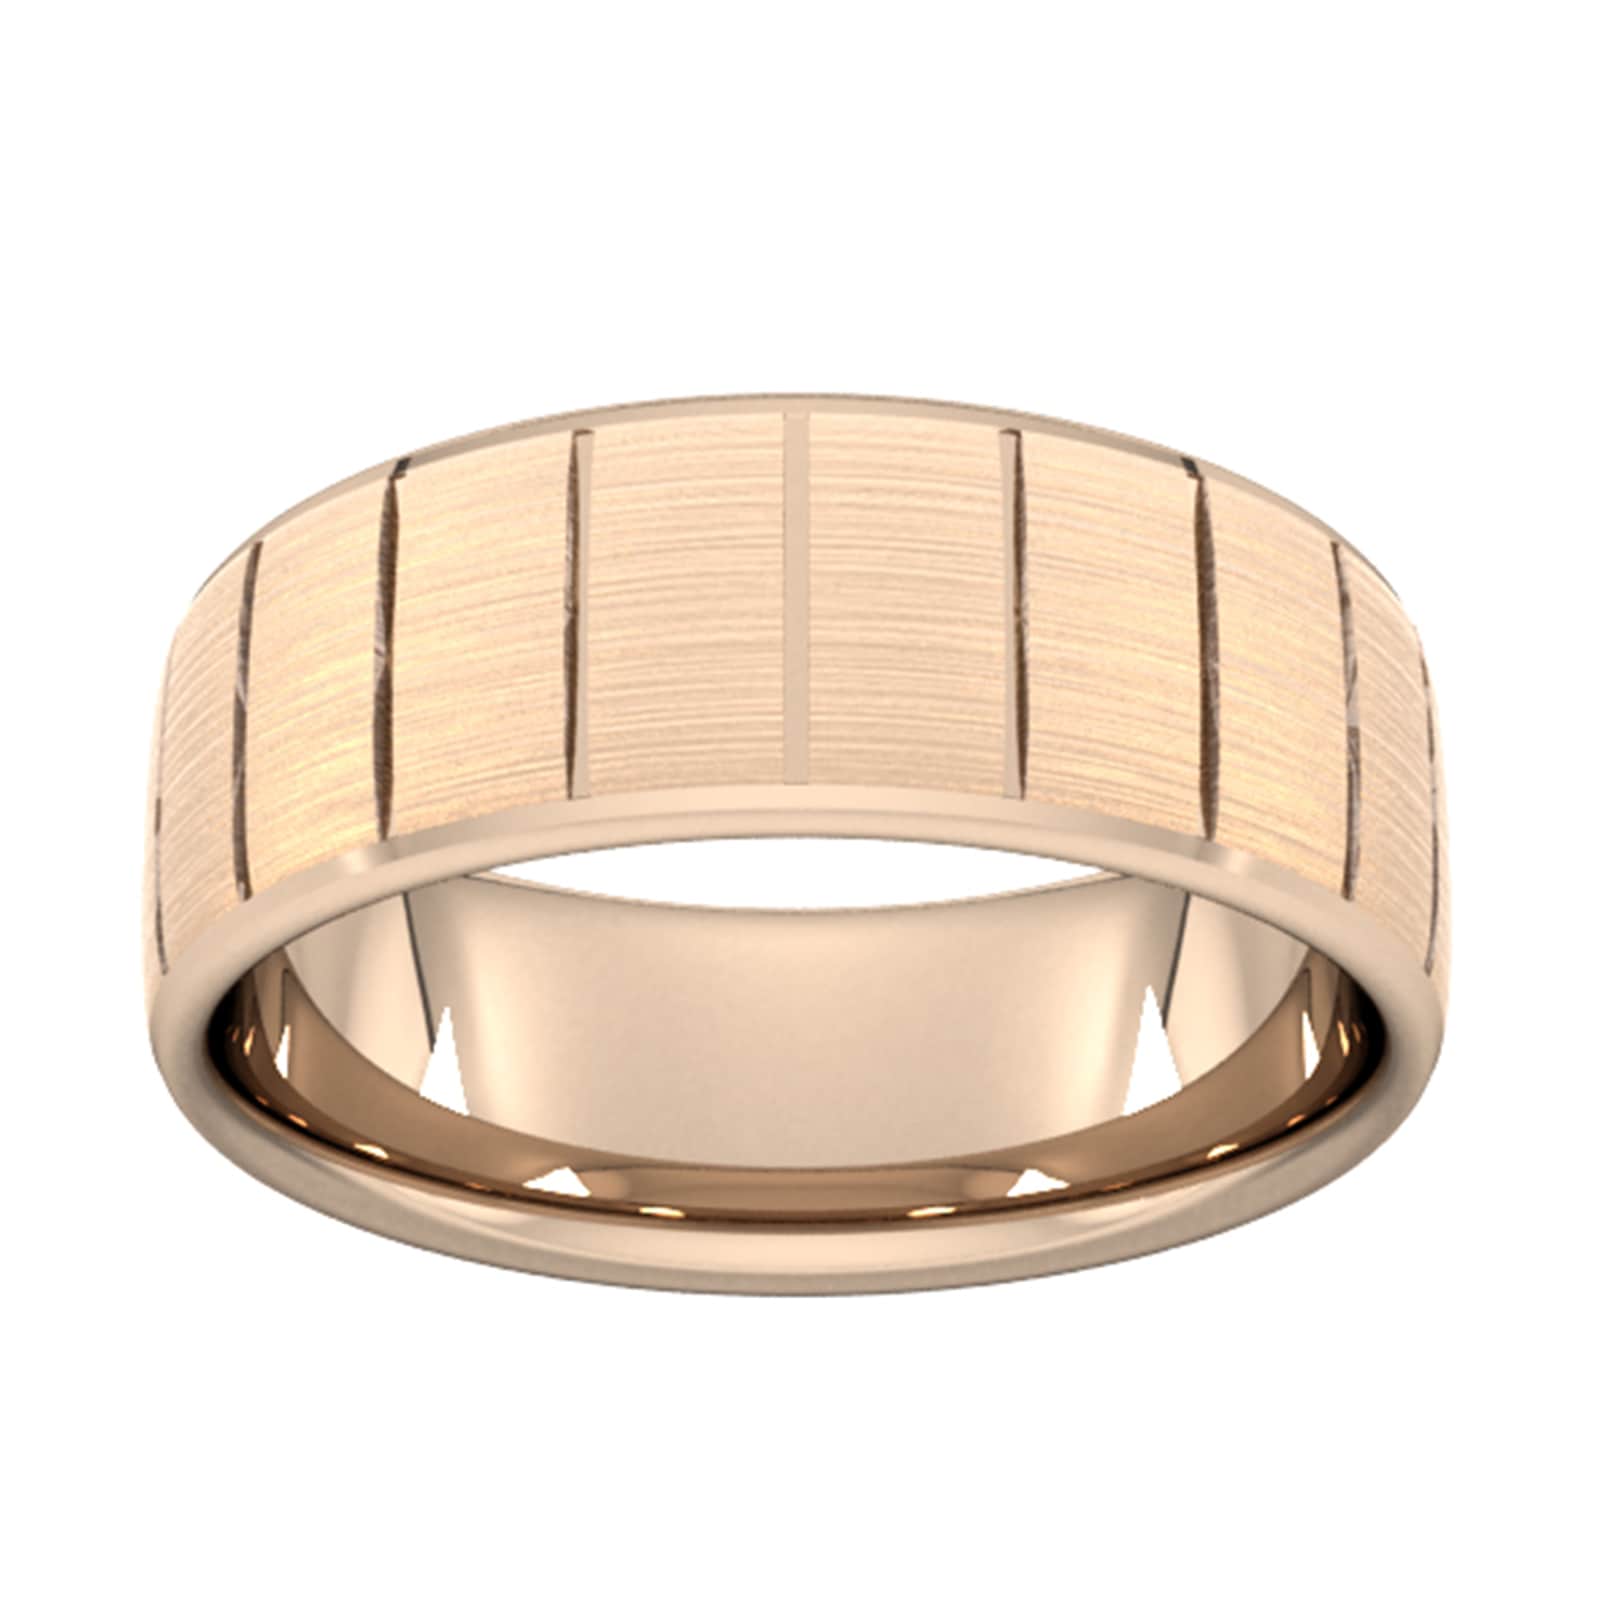 8mm D Shape Heavy Vertical Lines Wedding Ring In 18 Carat Rose Gold - Ring Size U